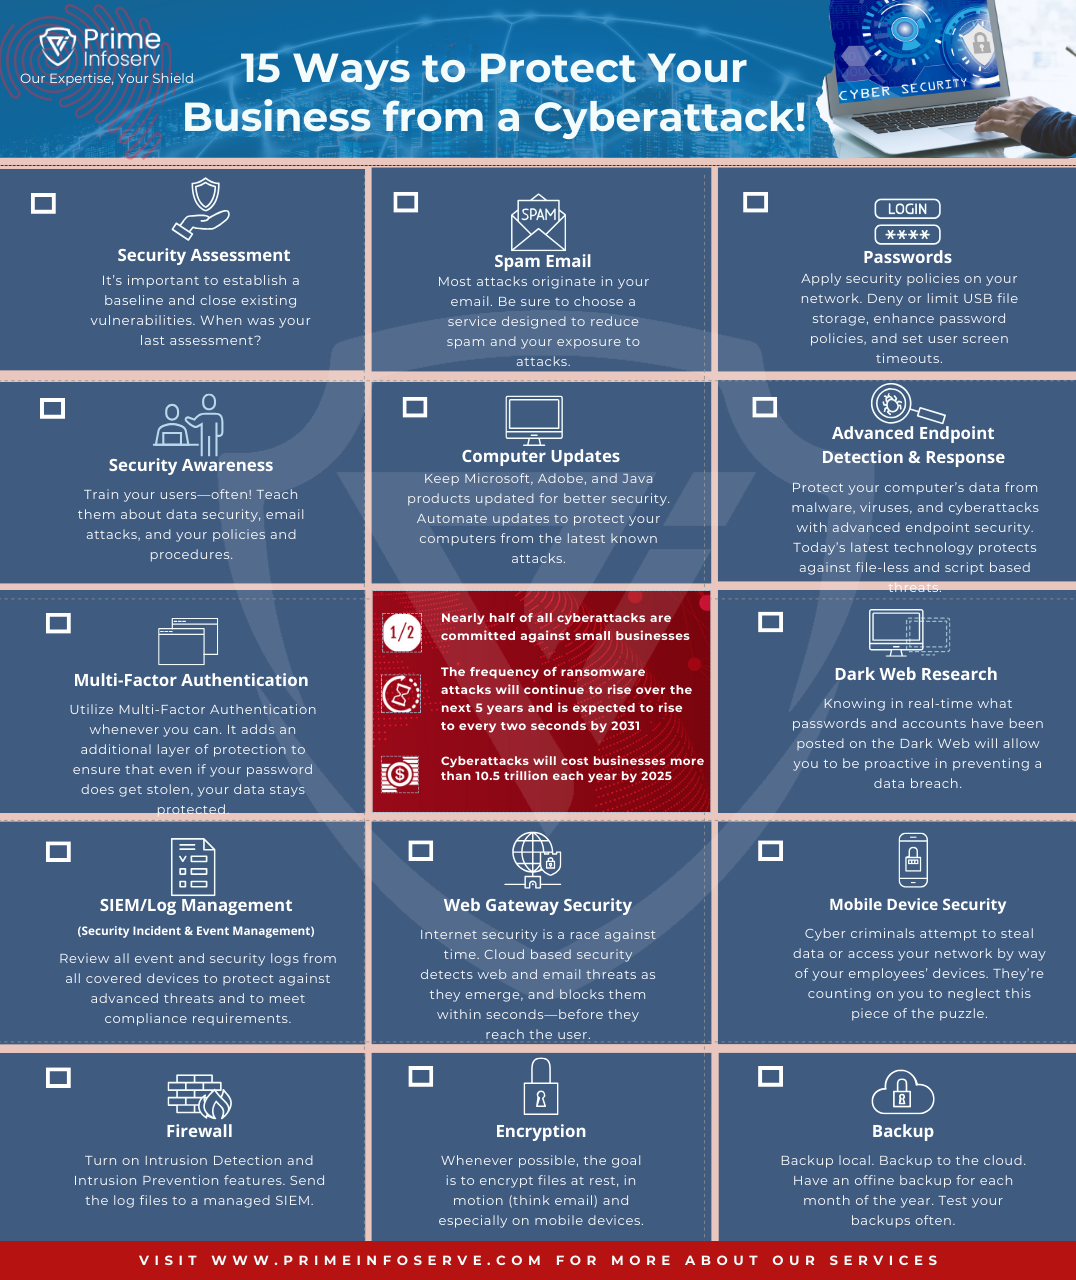 15 Ways to Protect Your Business from a Cyberattack